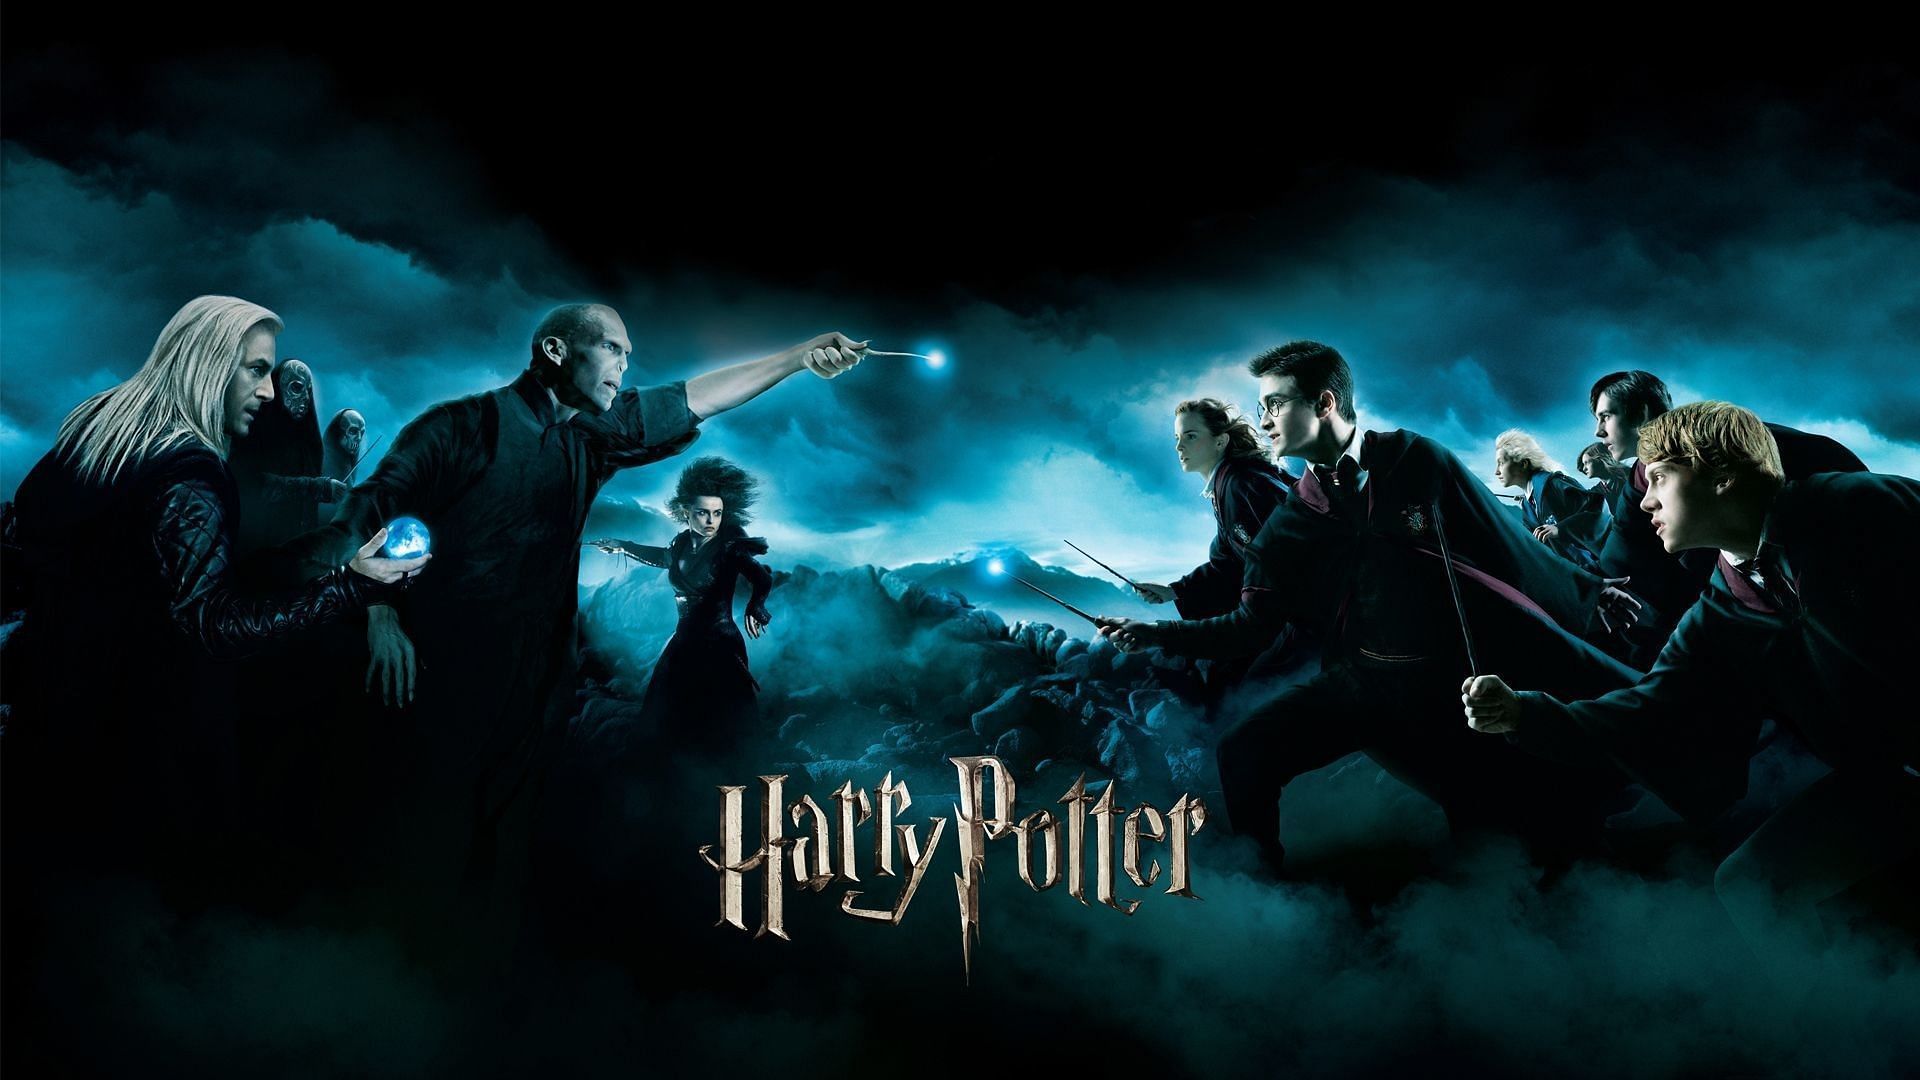 A poster of Harry Potter and the Deathly Hallows Part II (Image via WB)